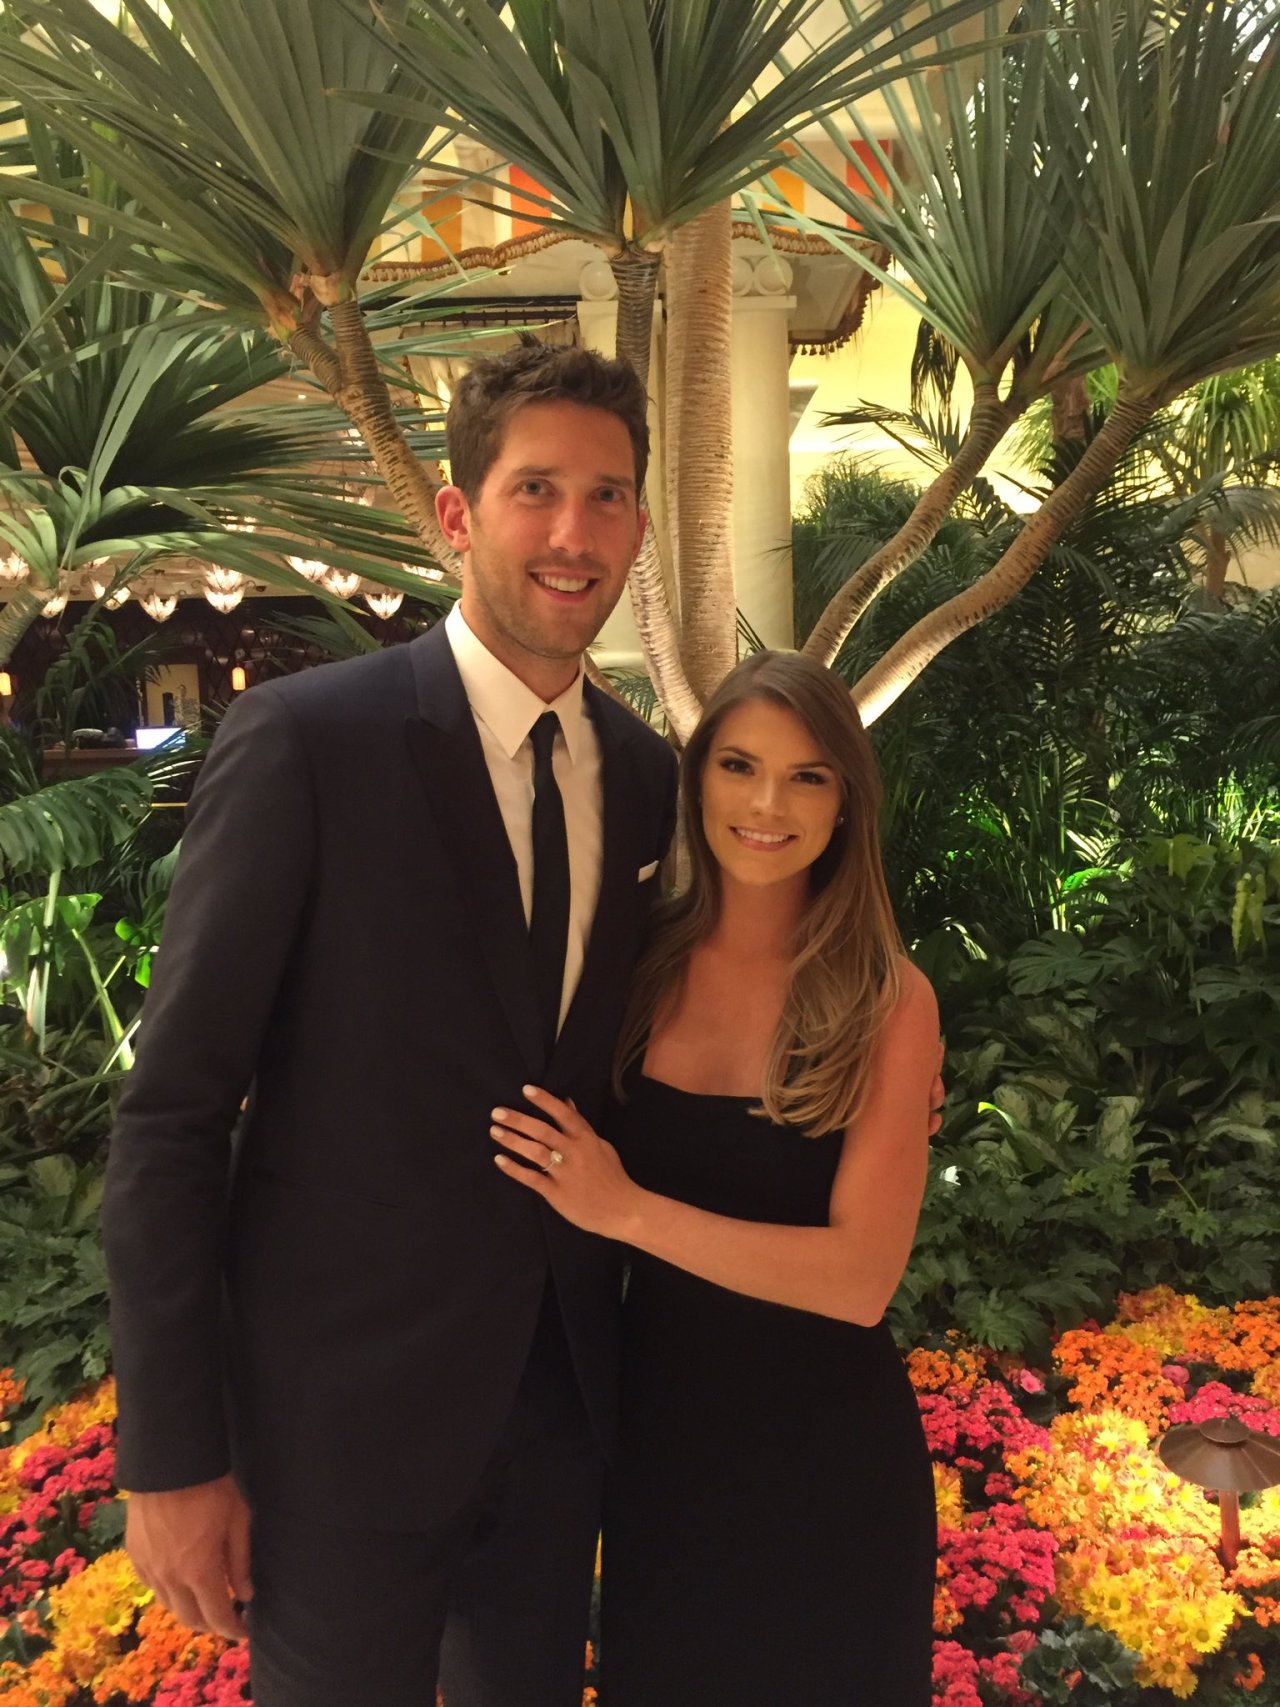 Wives and Girlfriends of NHL players — Ben Bishop & His Girlfriend